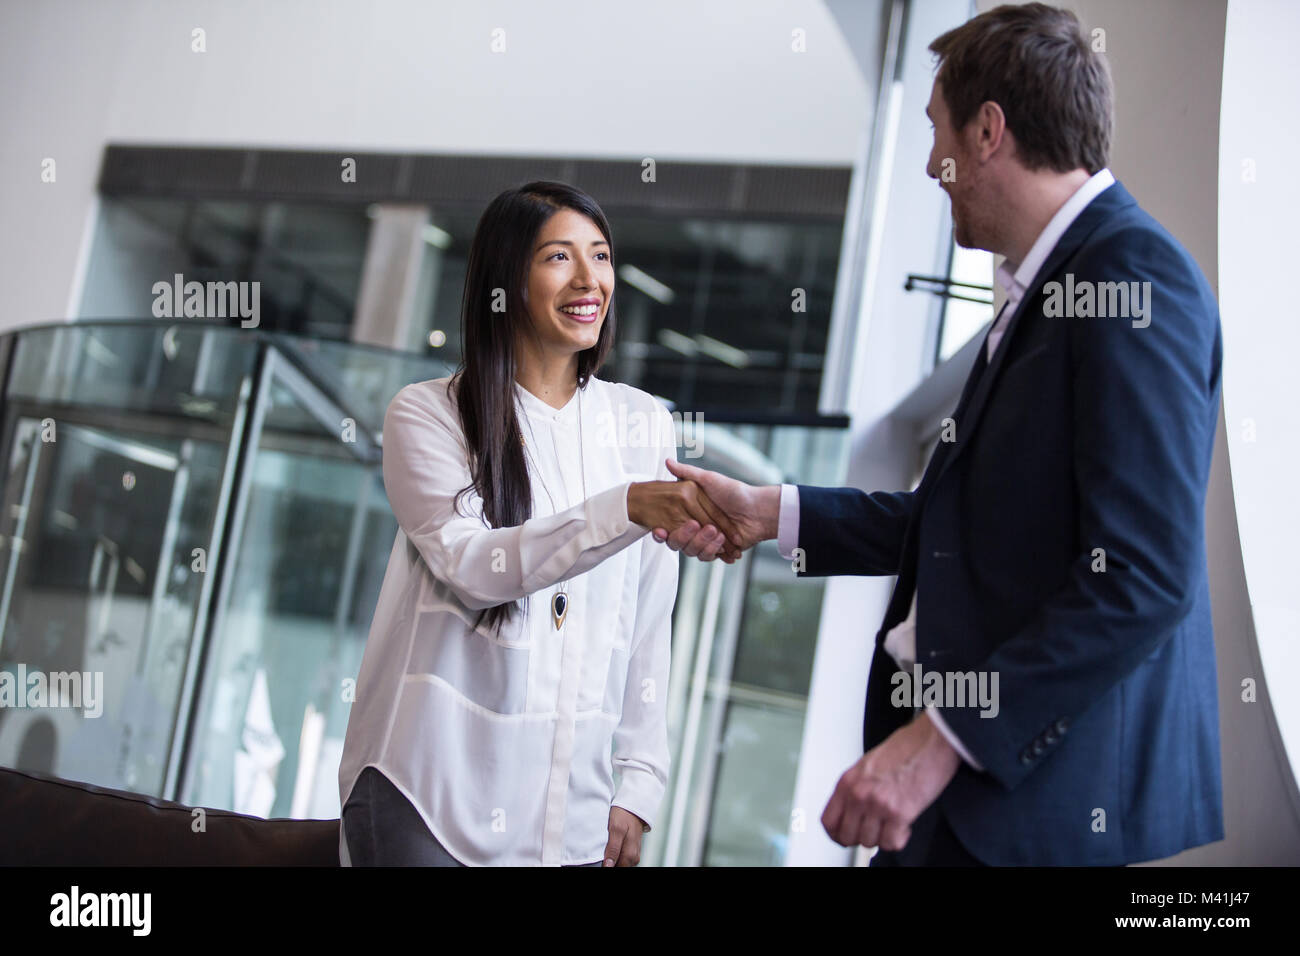 Businesswoman shaking hands with businessman Banque D'Images